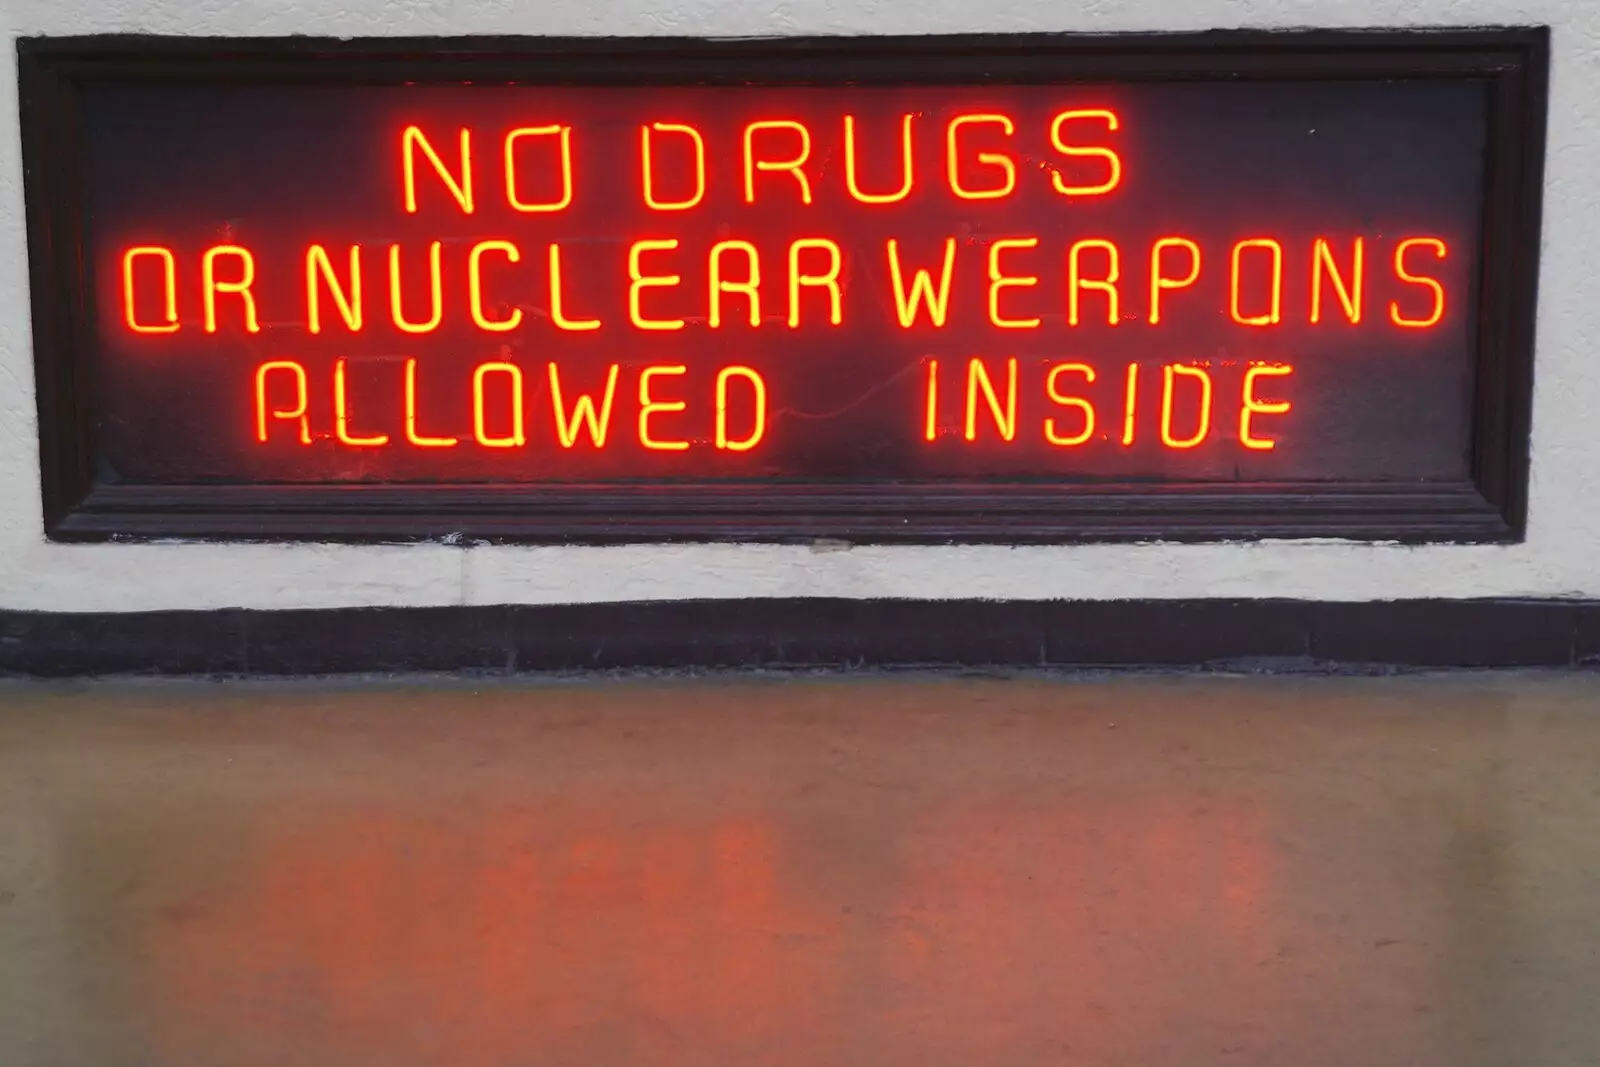 Amusing sign: no drugs or nuclear weapons allowed, from Rosarito and Tijuana, Baja California, Mexico - 2nd March 2008